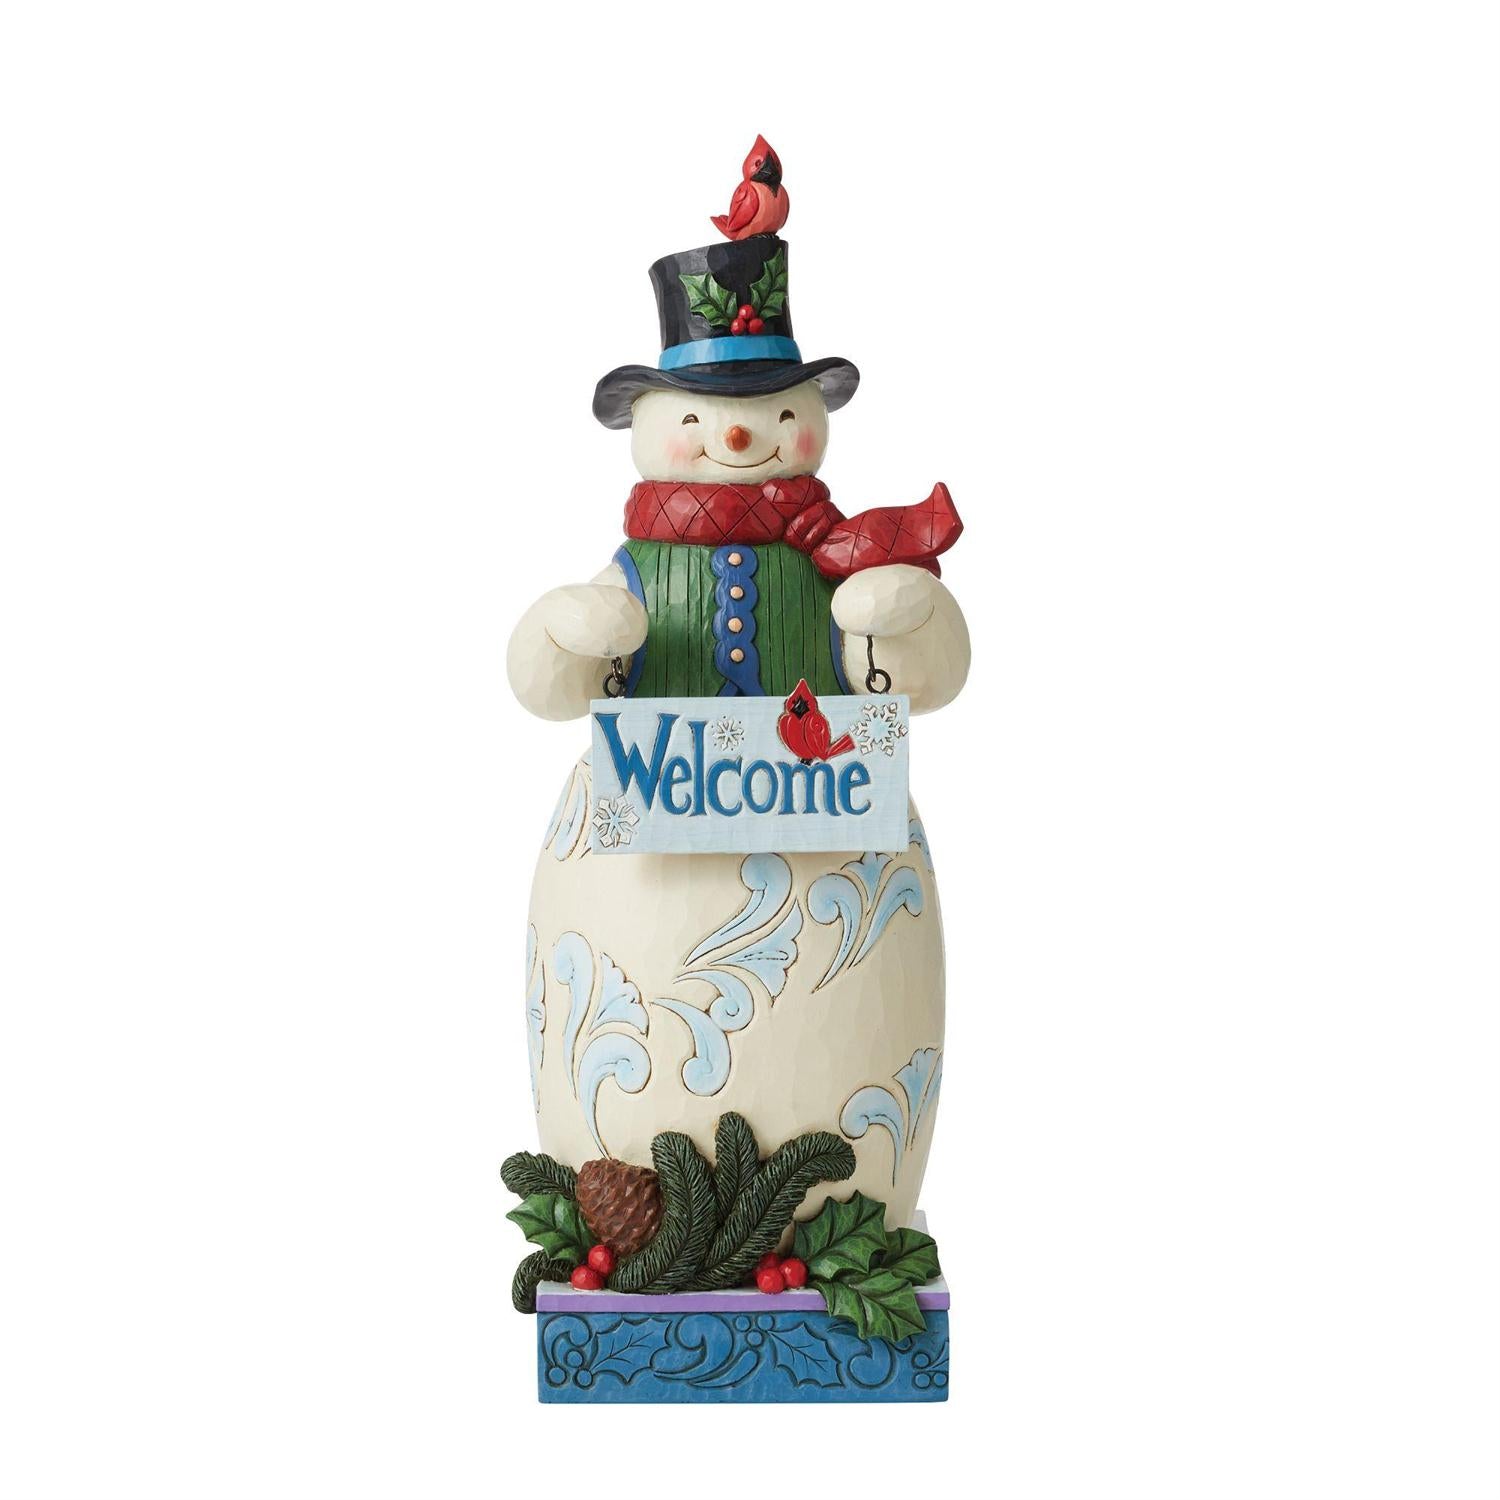 Jim Shore Snowman Statue With 2-Sided Sign